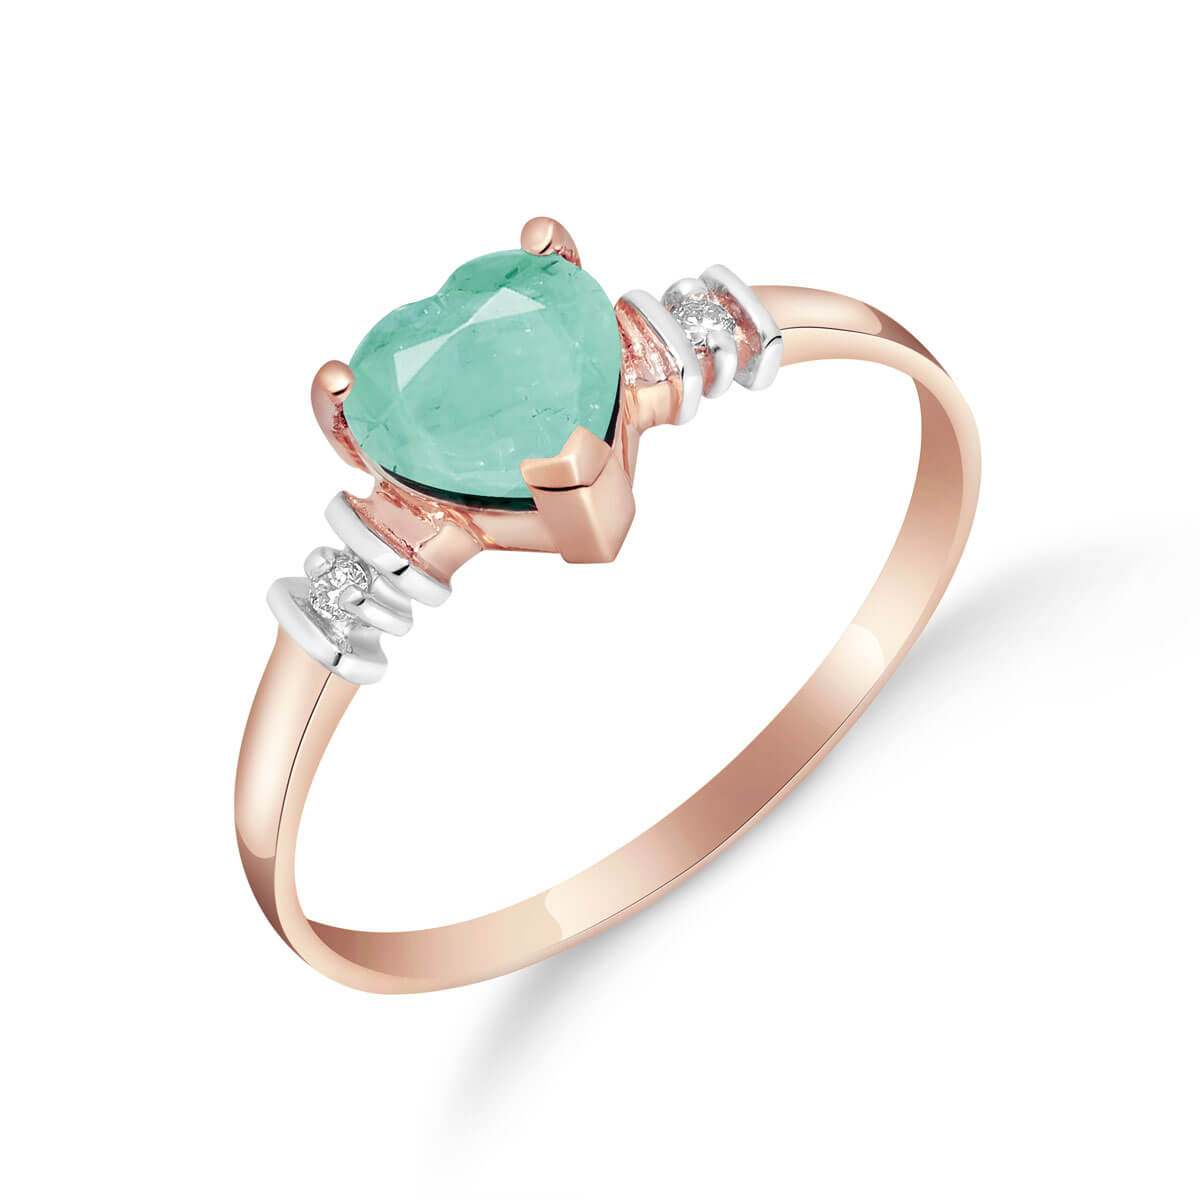 Emerald & Diamond Heart Ring in 18ct Rose Gold